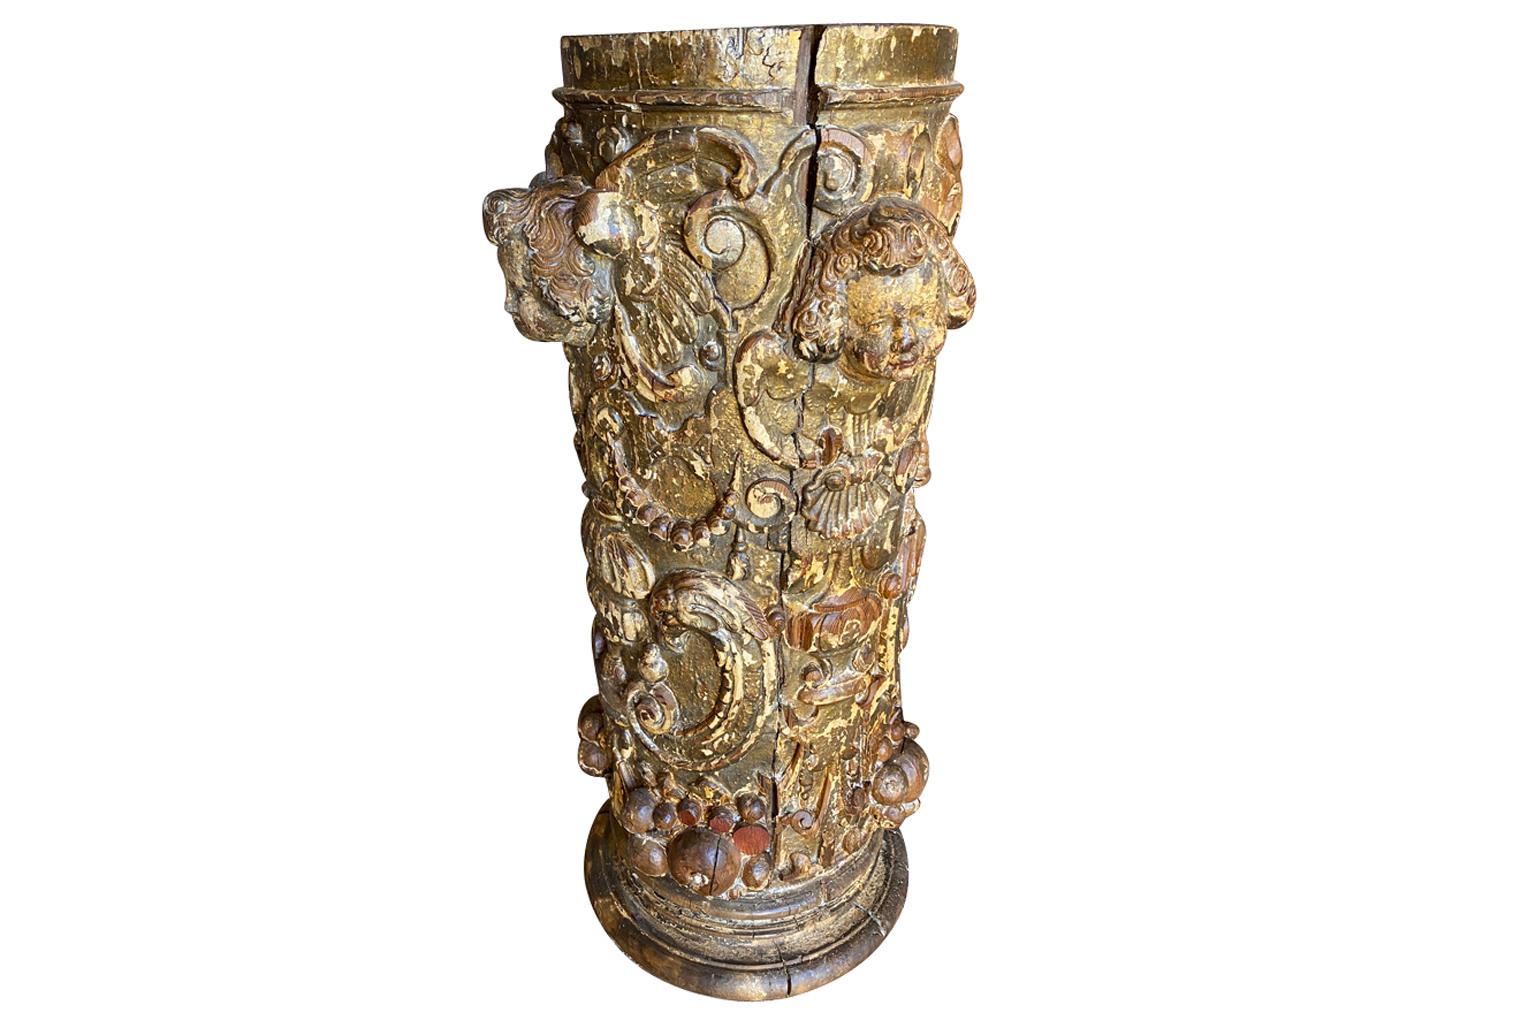 A stunning 16th century Venetian Column - Pedestal. Beautifully crafted from gilt and polychromed wood. Wonderful cavings of putti heads, urns and pomegranates. Sensational patina. Ideal for displaying an urn or sculpture.